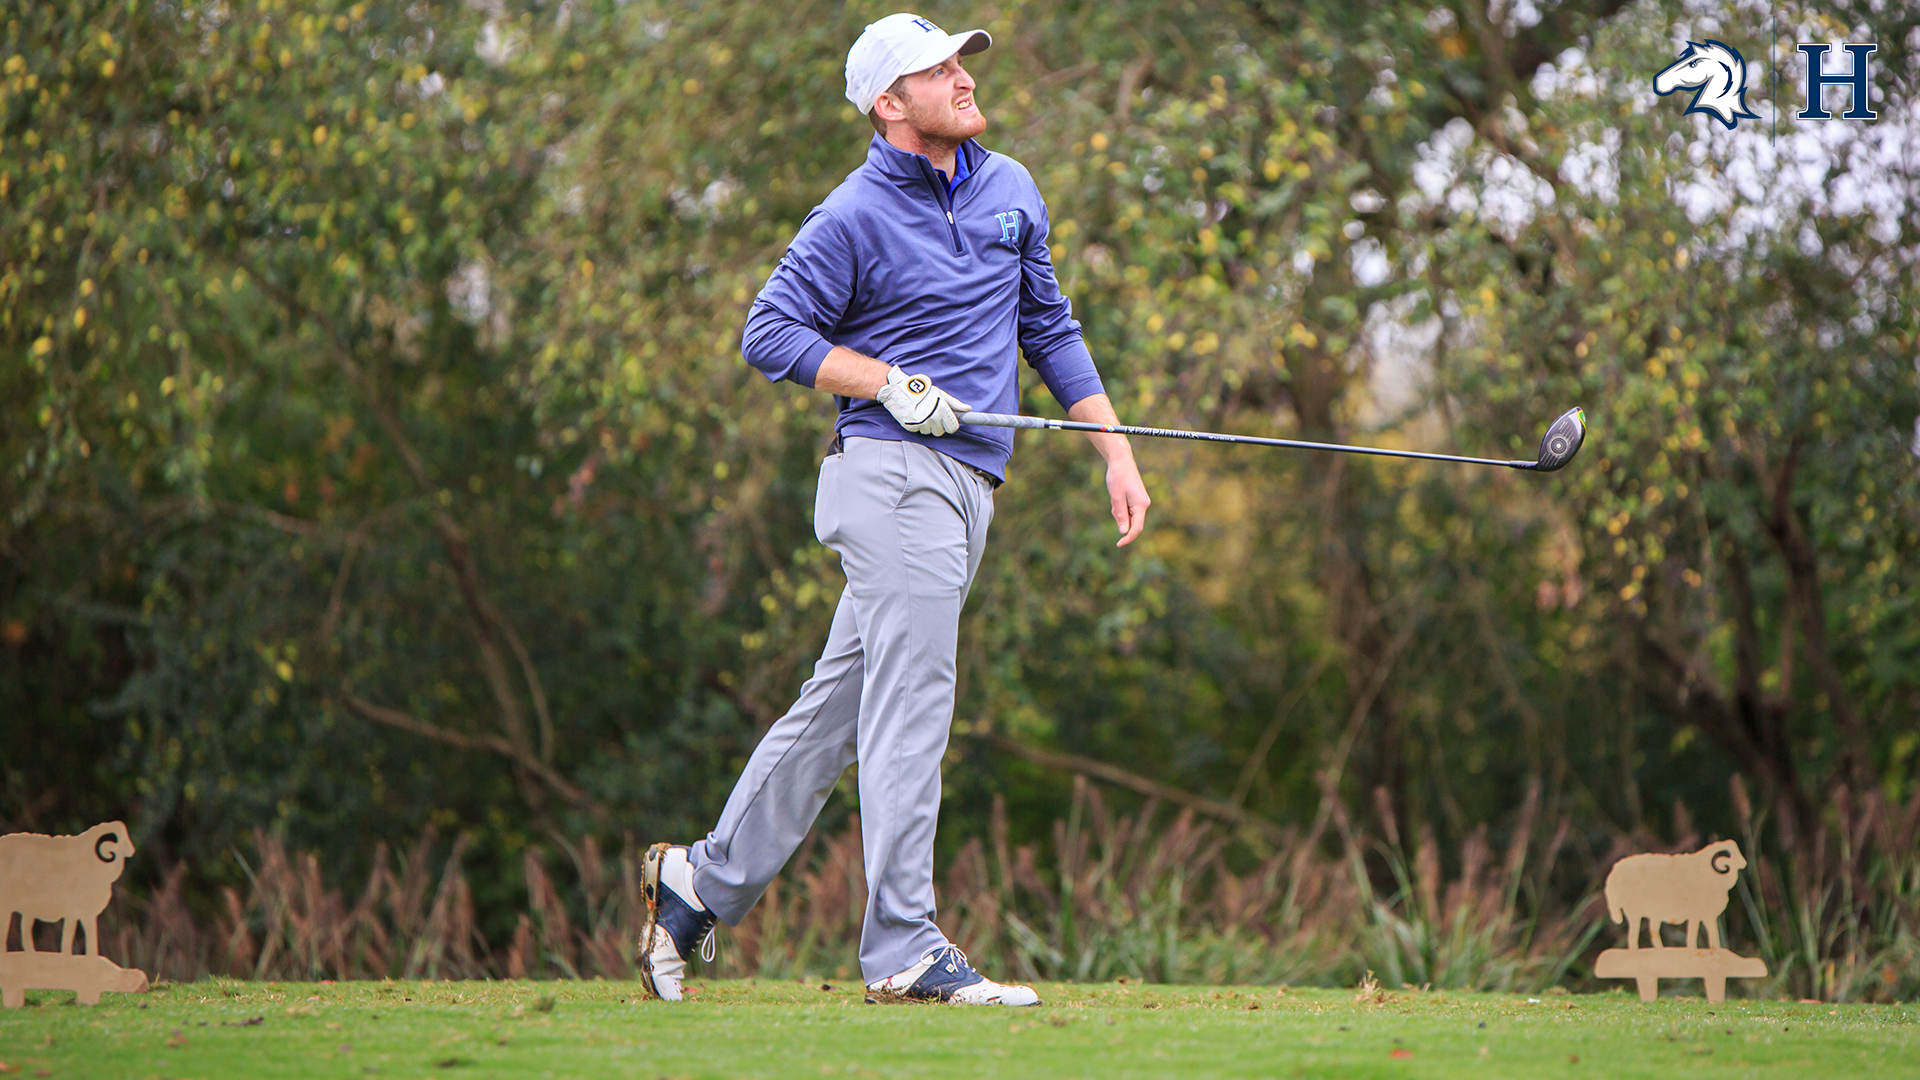 Charger men's golf team finishes a close fourth at SVSU Spring Invitational